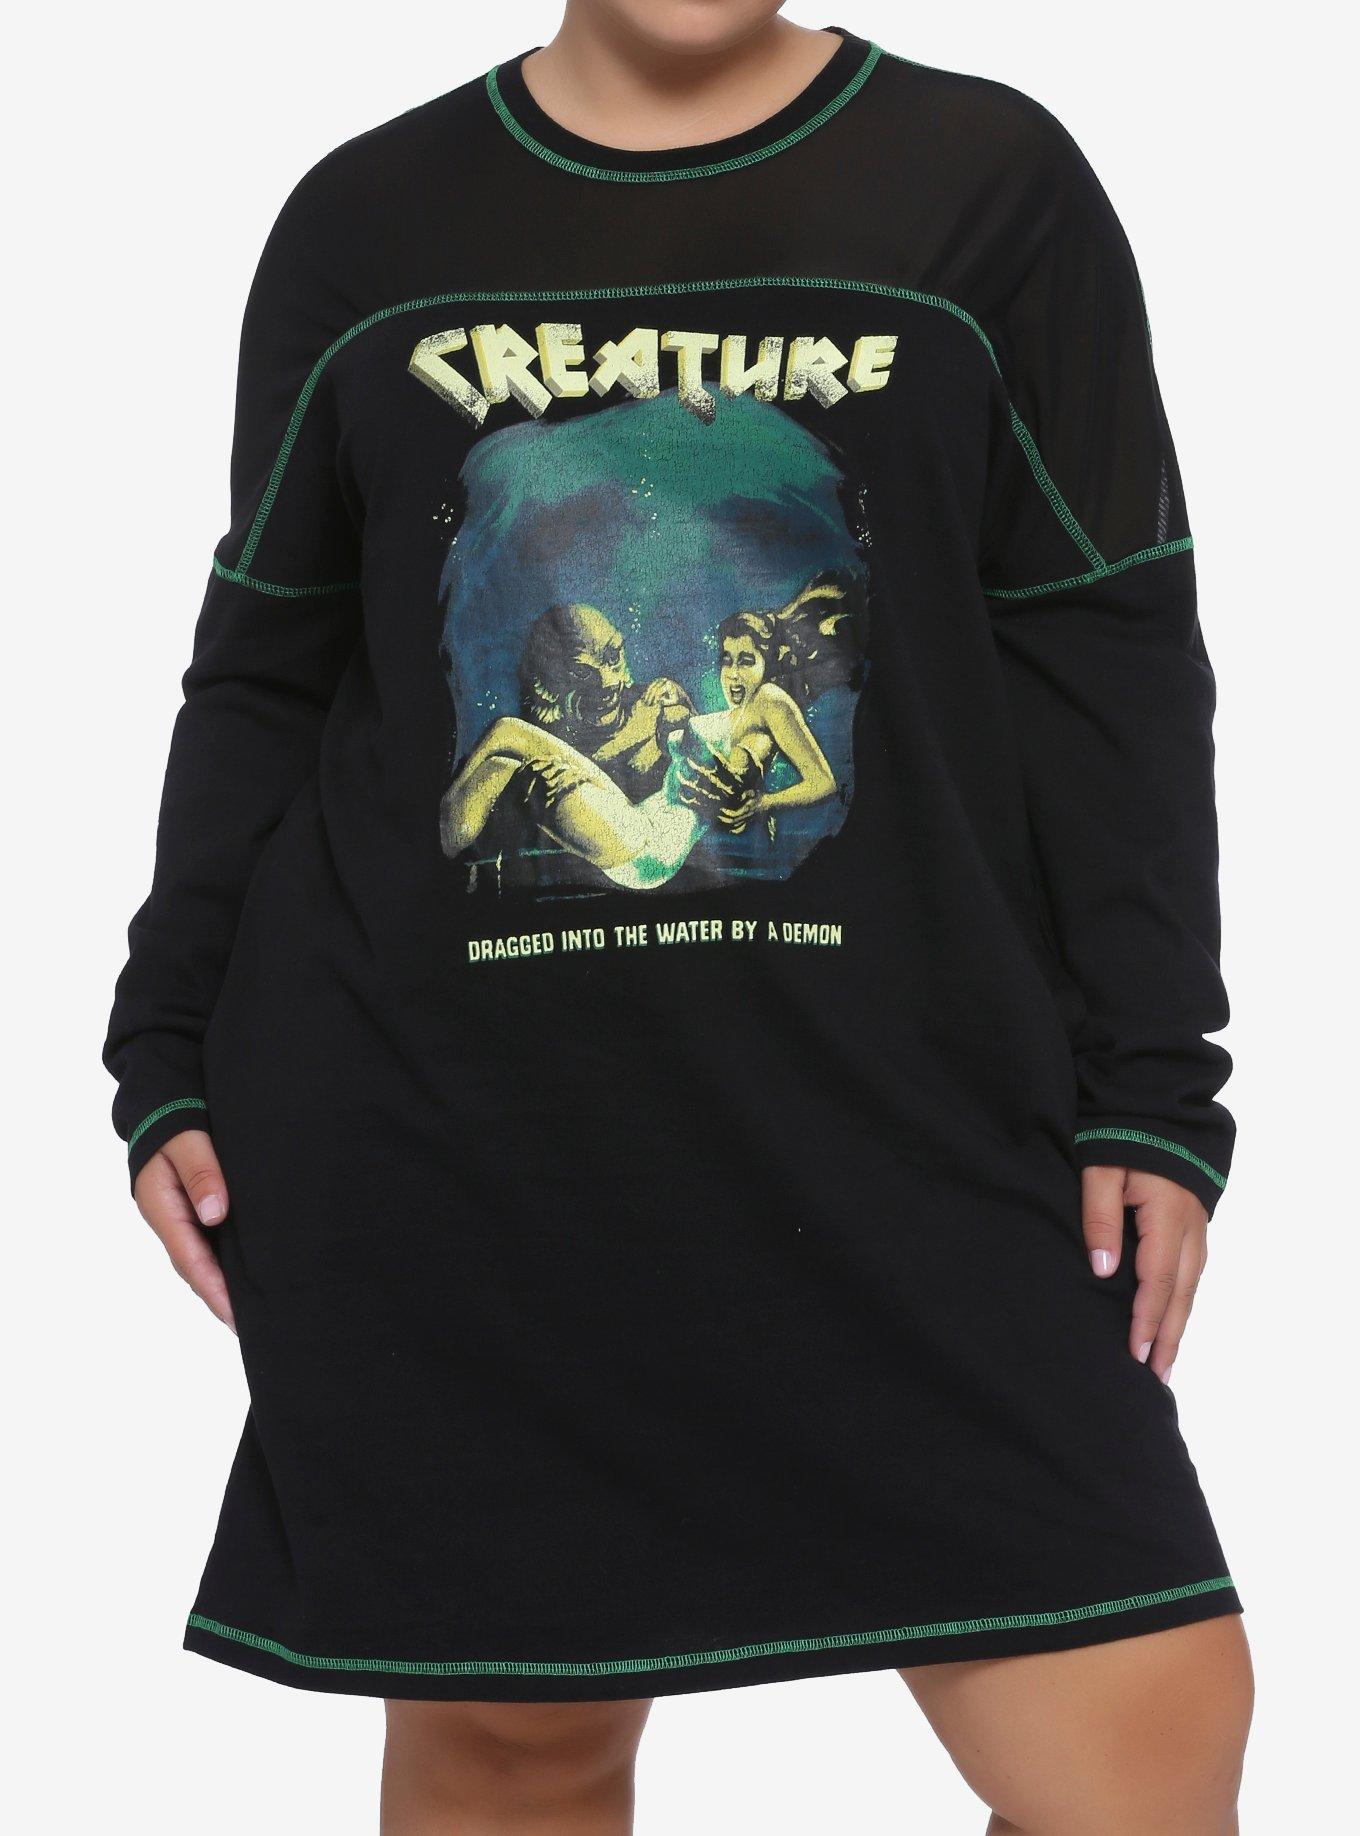 Universal Monsters Creature From The Black Lagoon Long-Sleeve T-Shirt Dress Plus Size, MULTI, hi-res